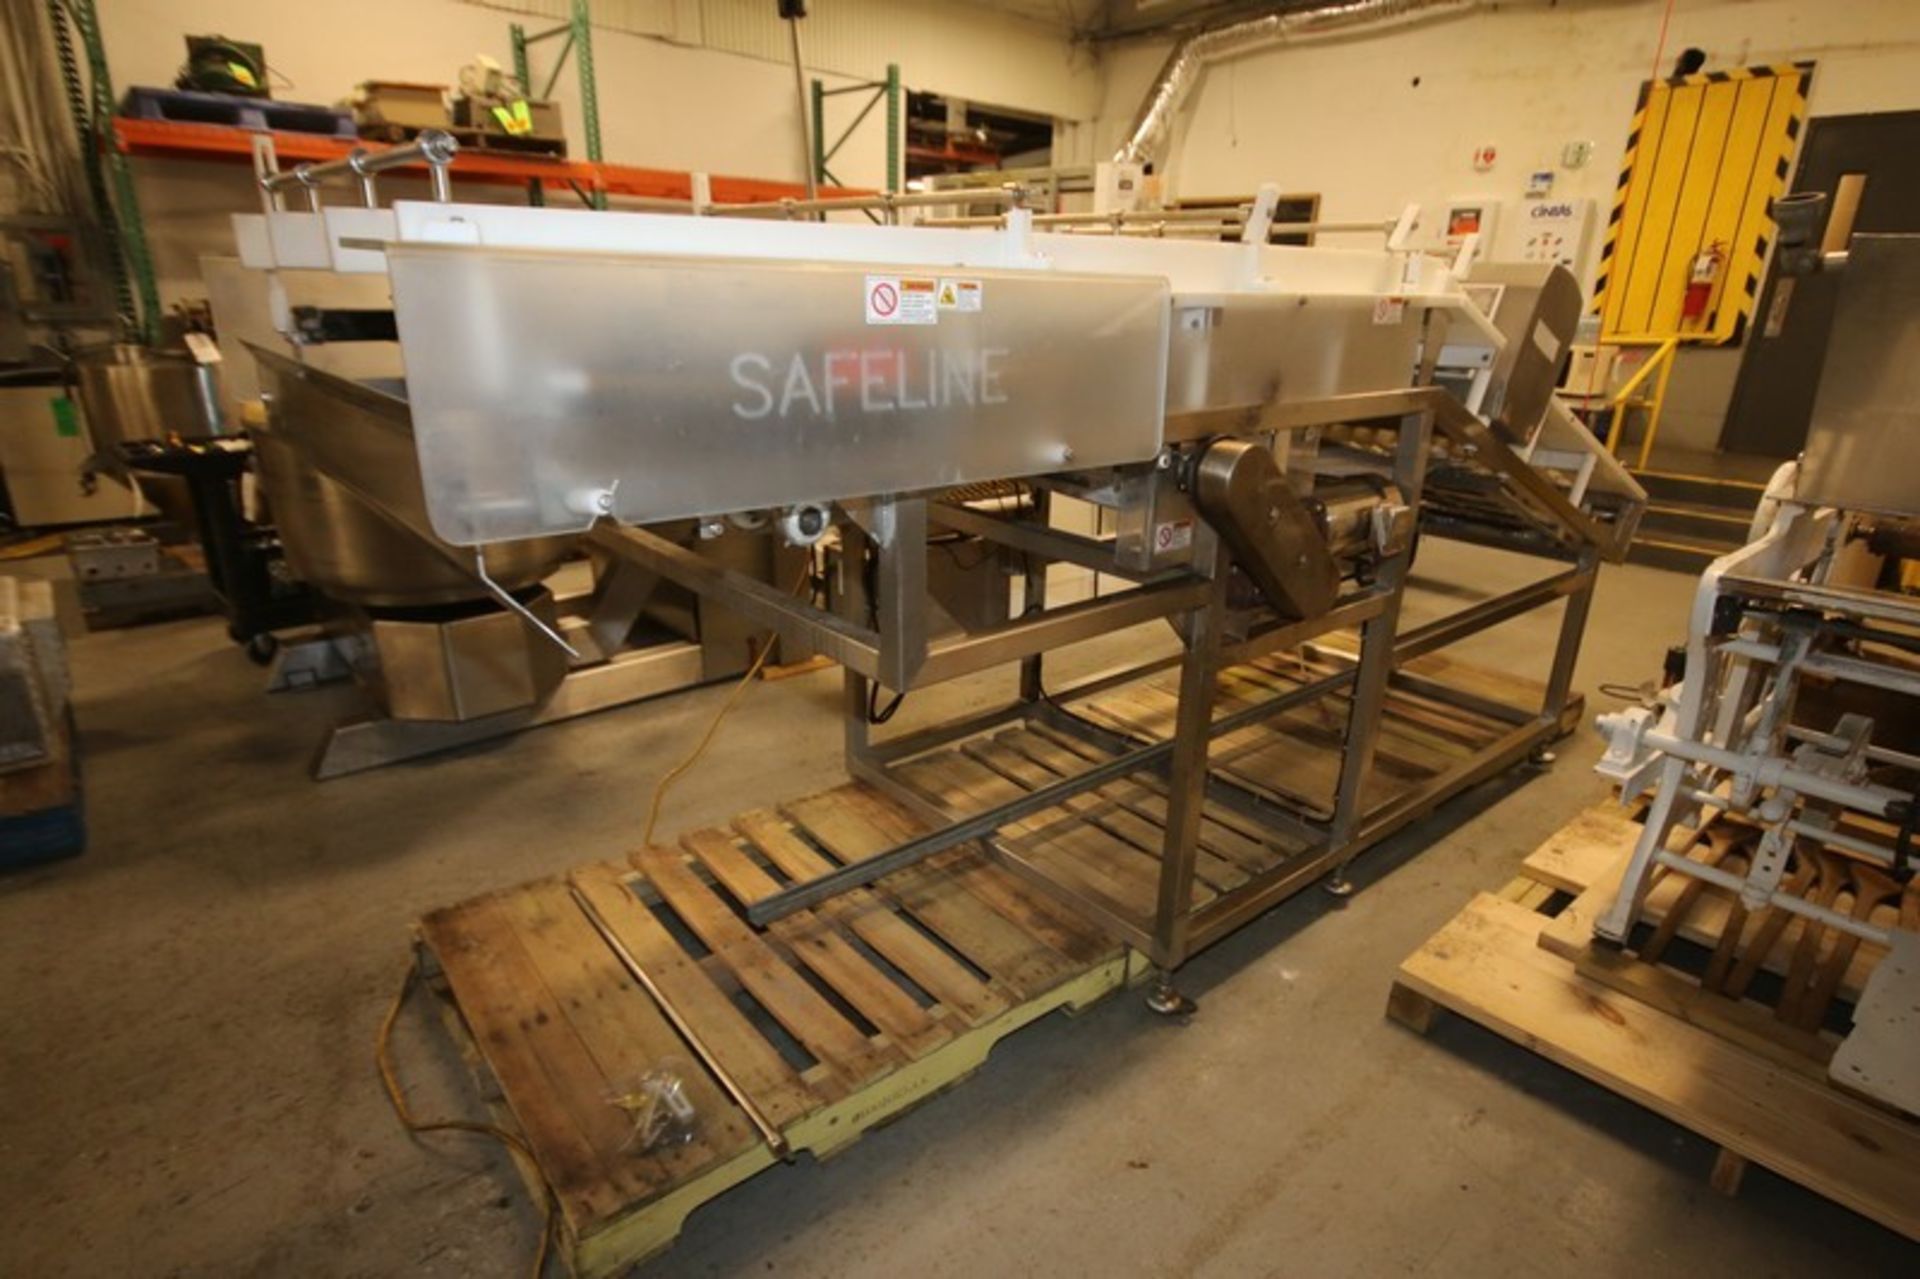 Safeline S/S Metal Detector / Conveyor System, Model SL2000, SN 7907701, with 3" W x 4" H Product - Image 5 of 9